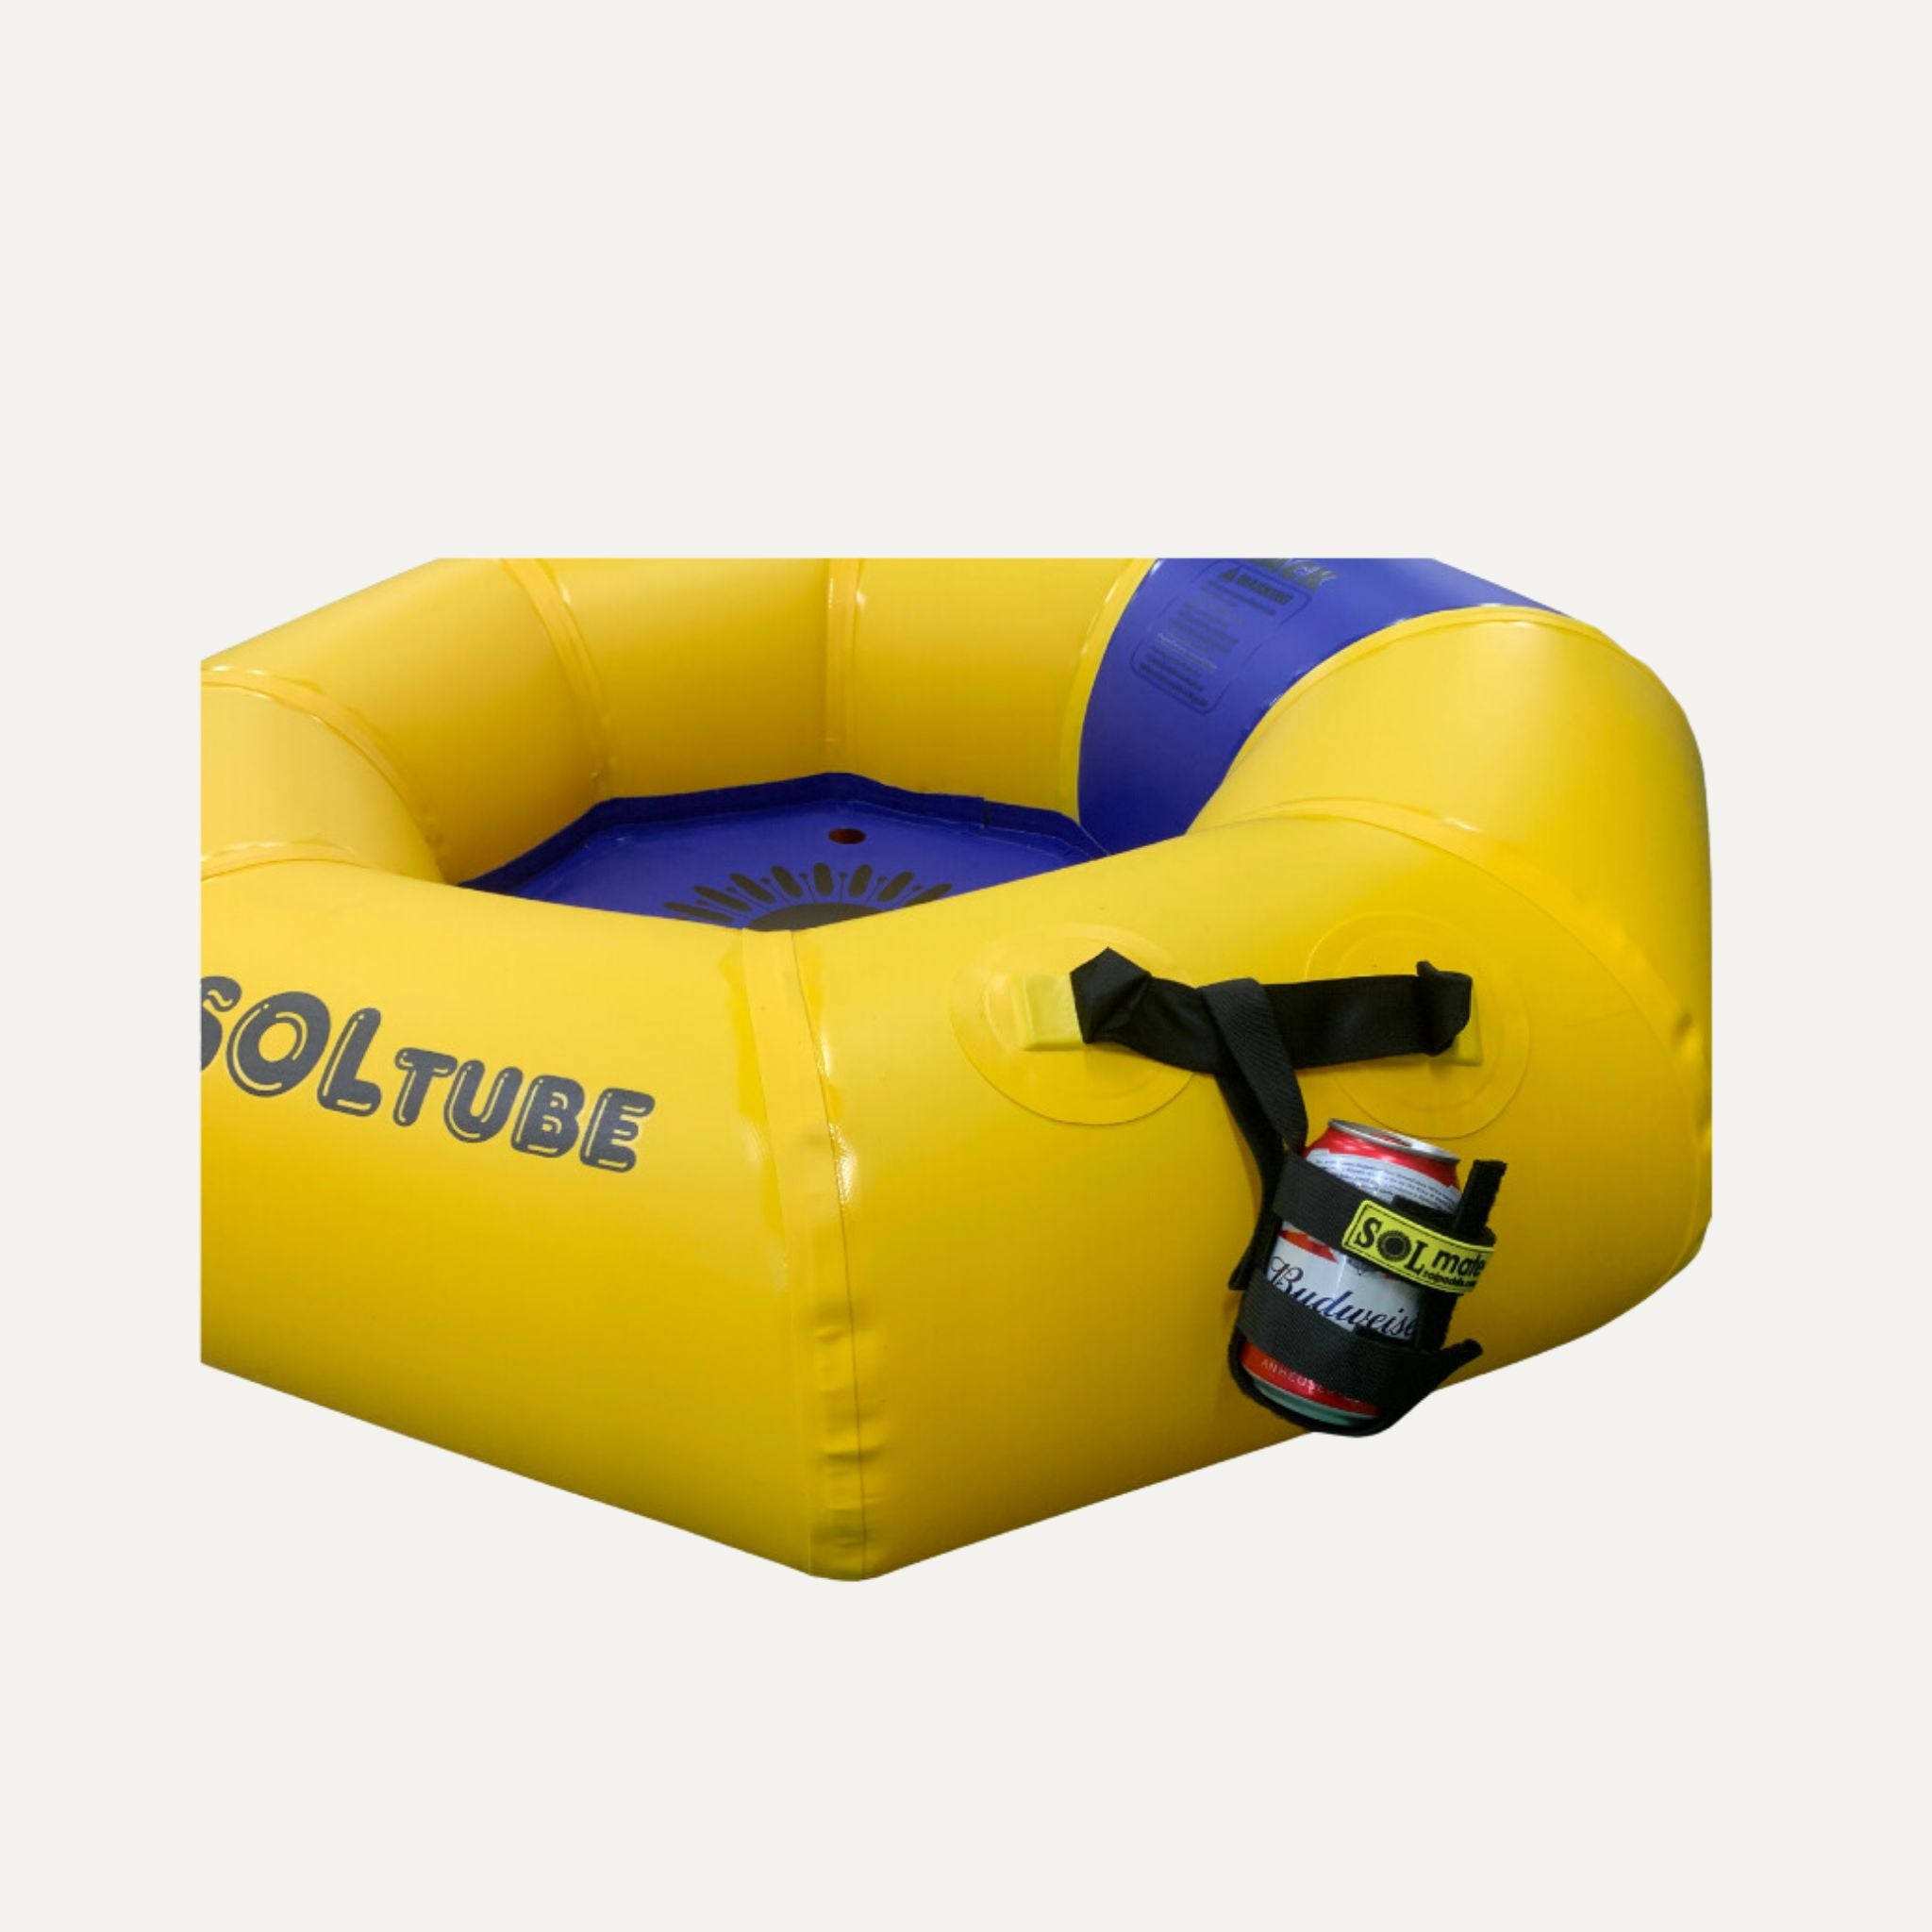 A yellow and blue inflatable SOLtube with an attached SOLmate can holder securely holding a can of Budweiser. The holder is fastened to the tube handle with adjustable straps, showcasing its convenience for keeping beverages within reach.